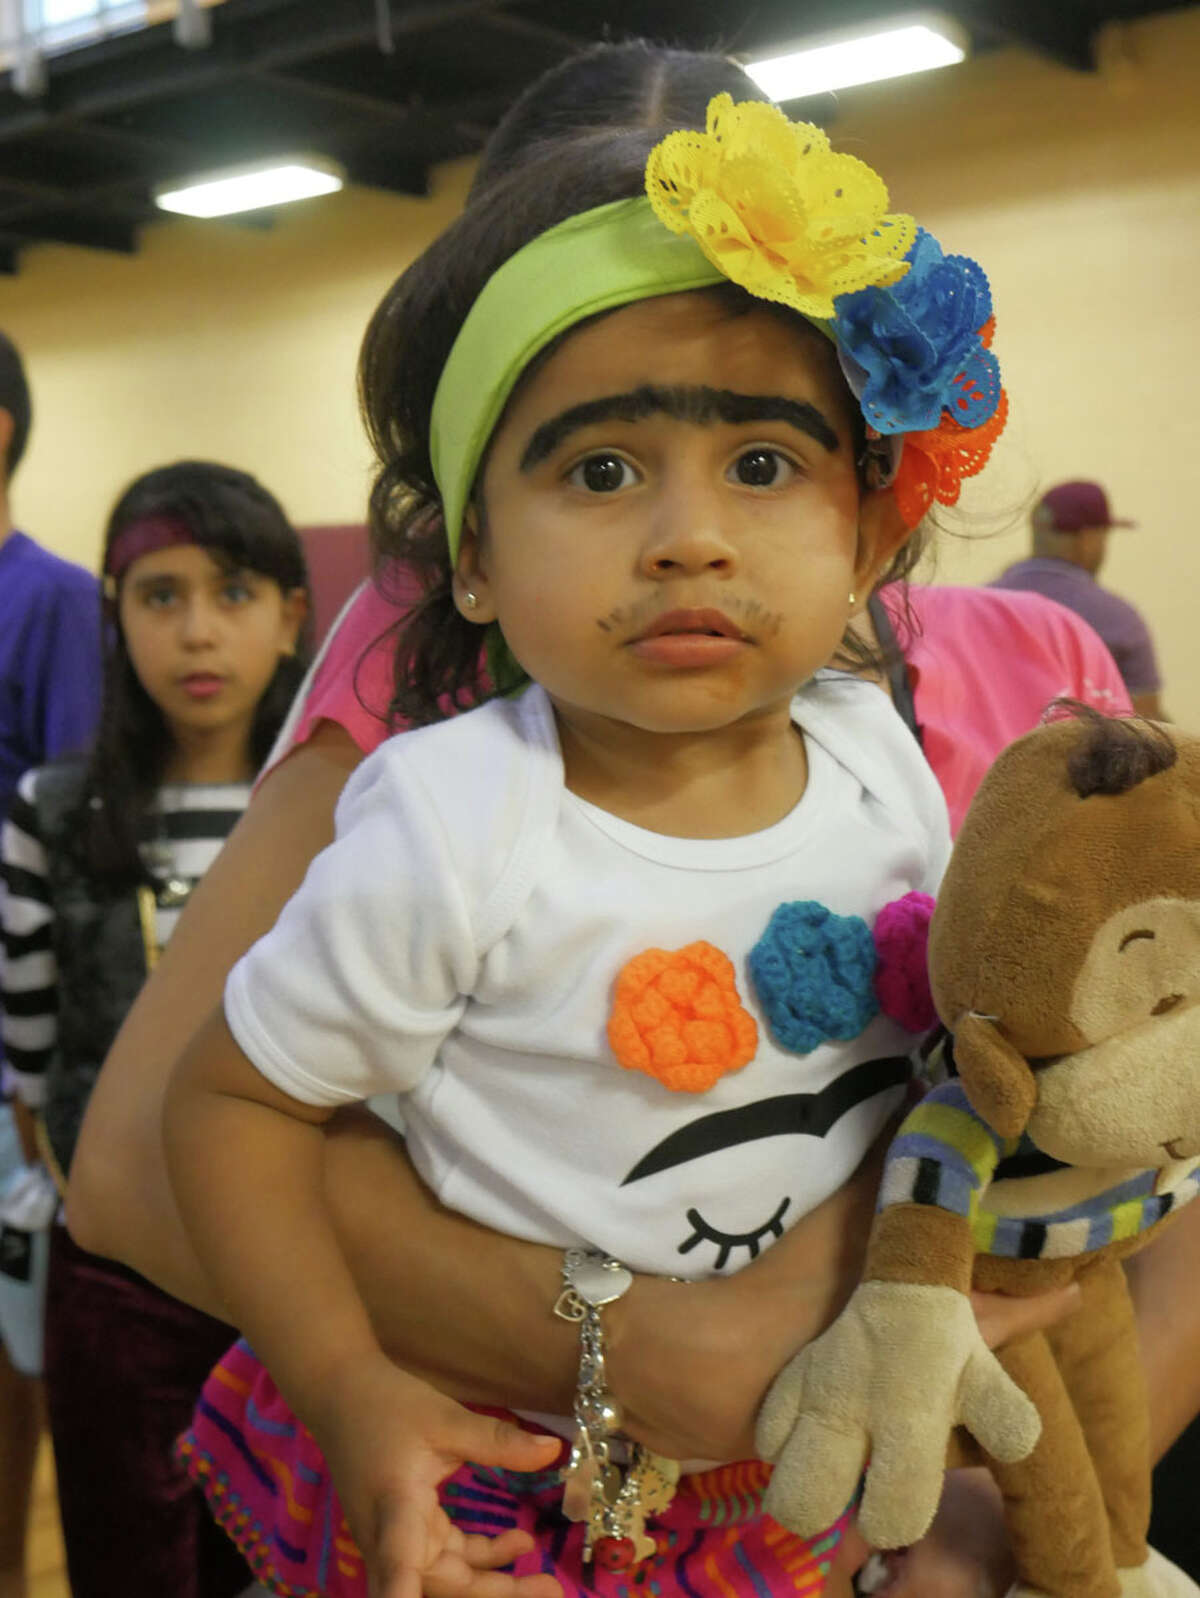 Families came out to the Eden Recreation Center as the City of Laredo hosted a haunted house, pumpkin patch and costume contest for Laredo youths.